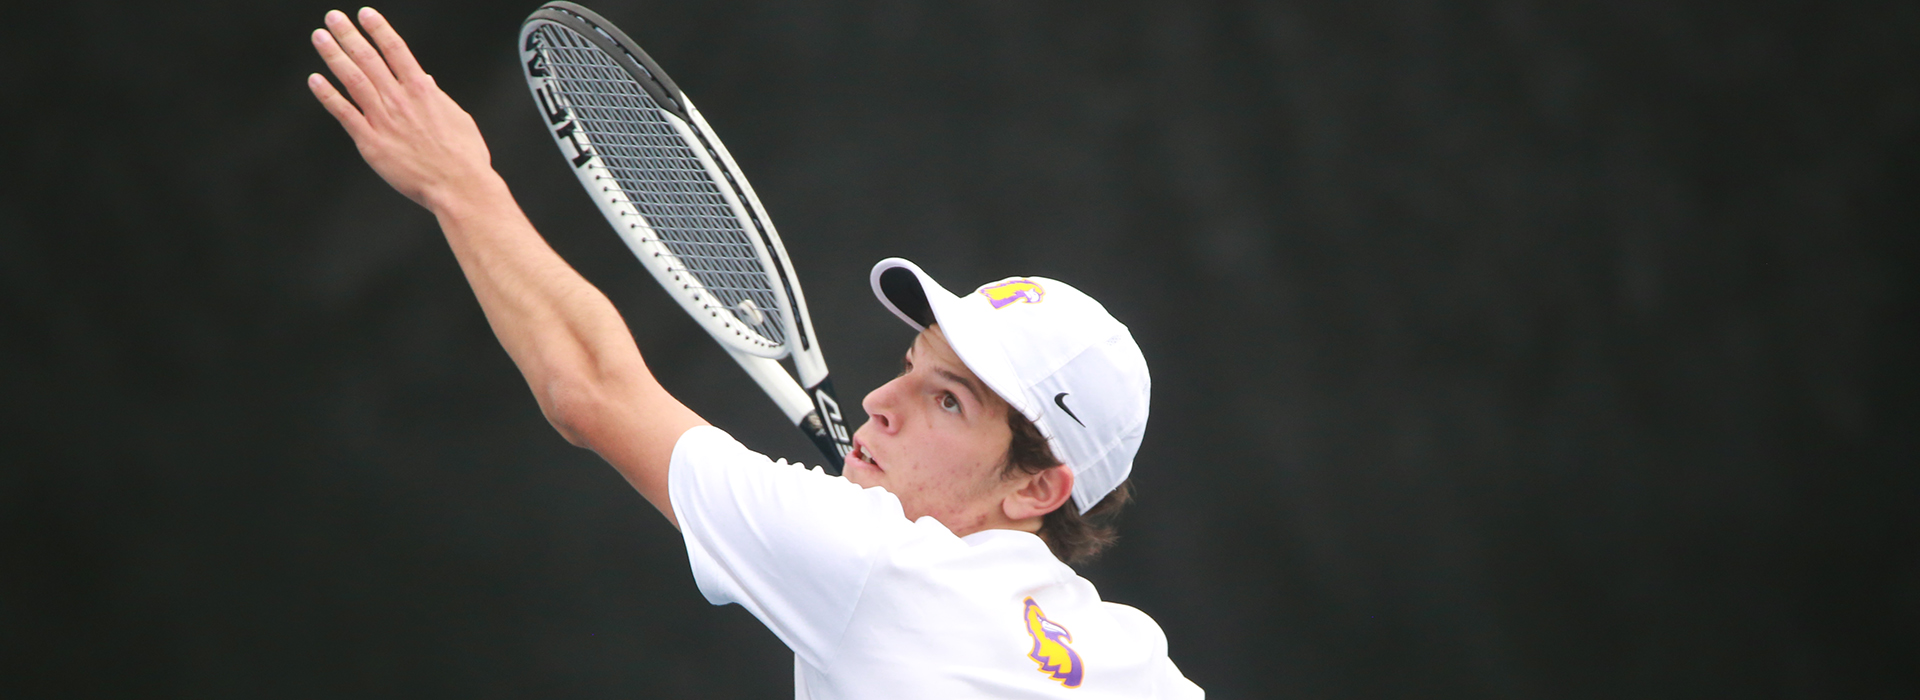 Tech tennis to clash with Jacksonville State and UAB in back-to-back home matches